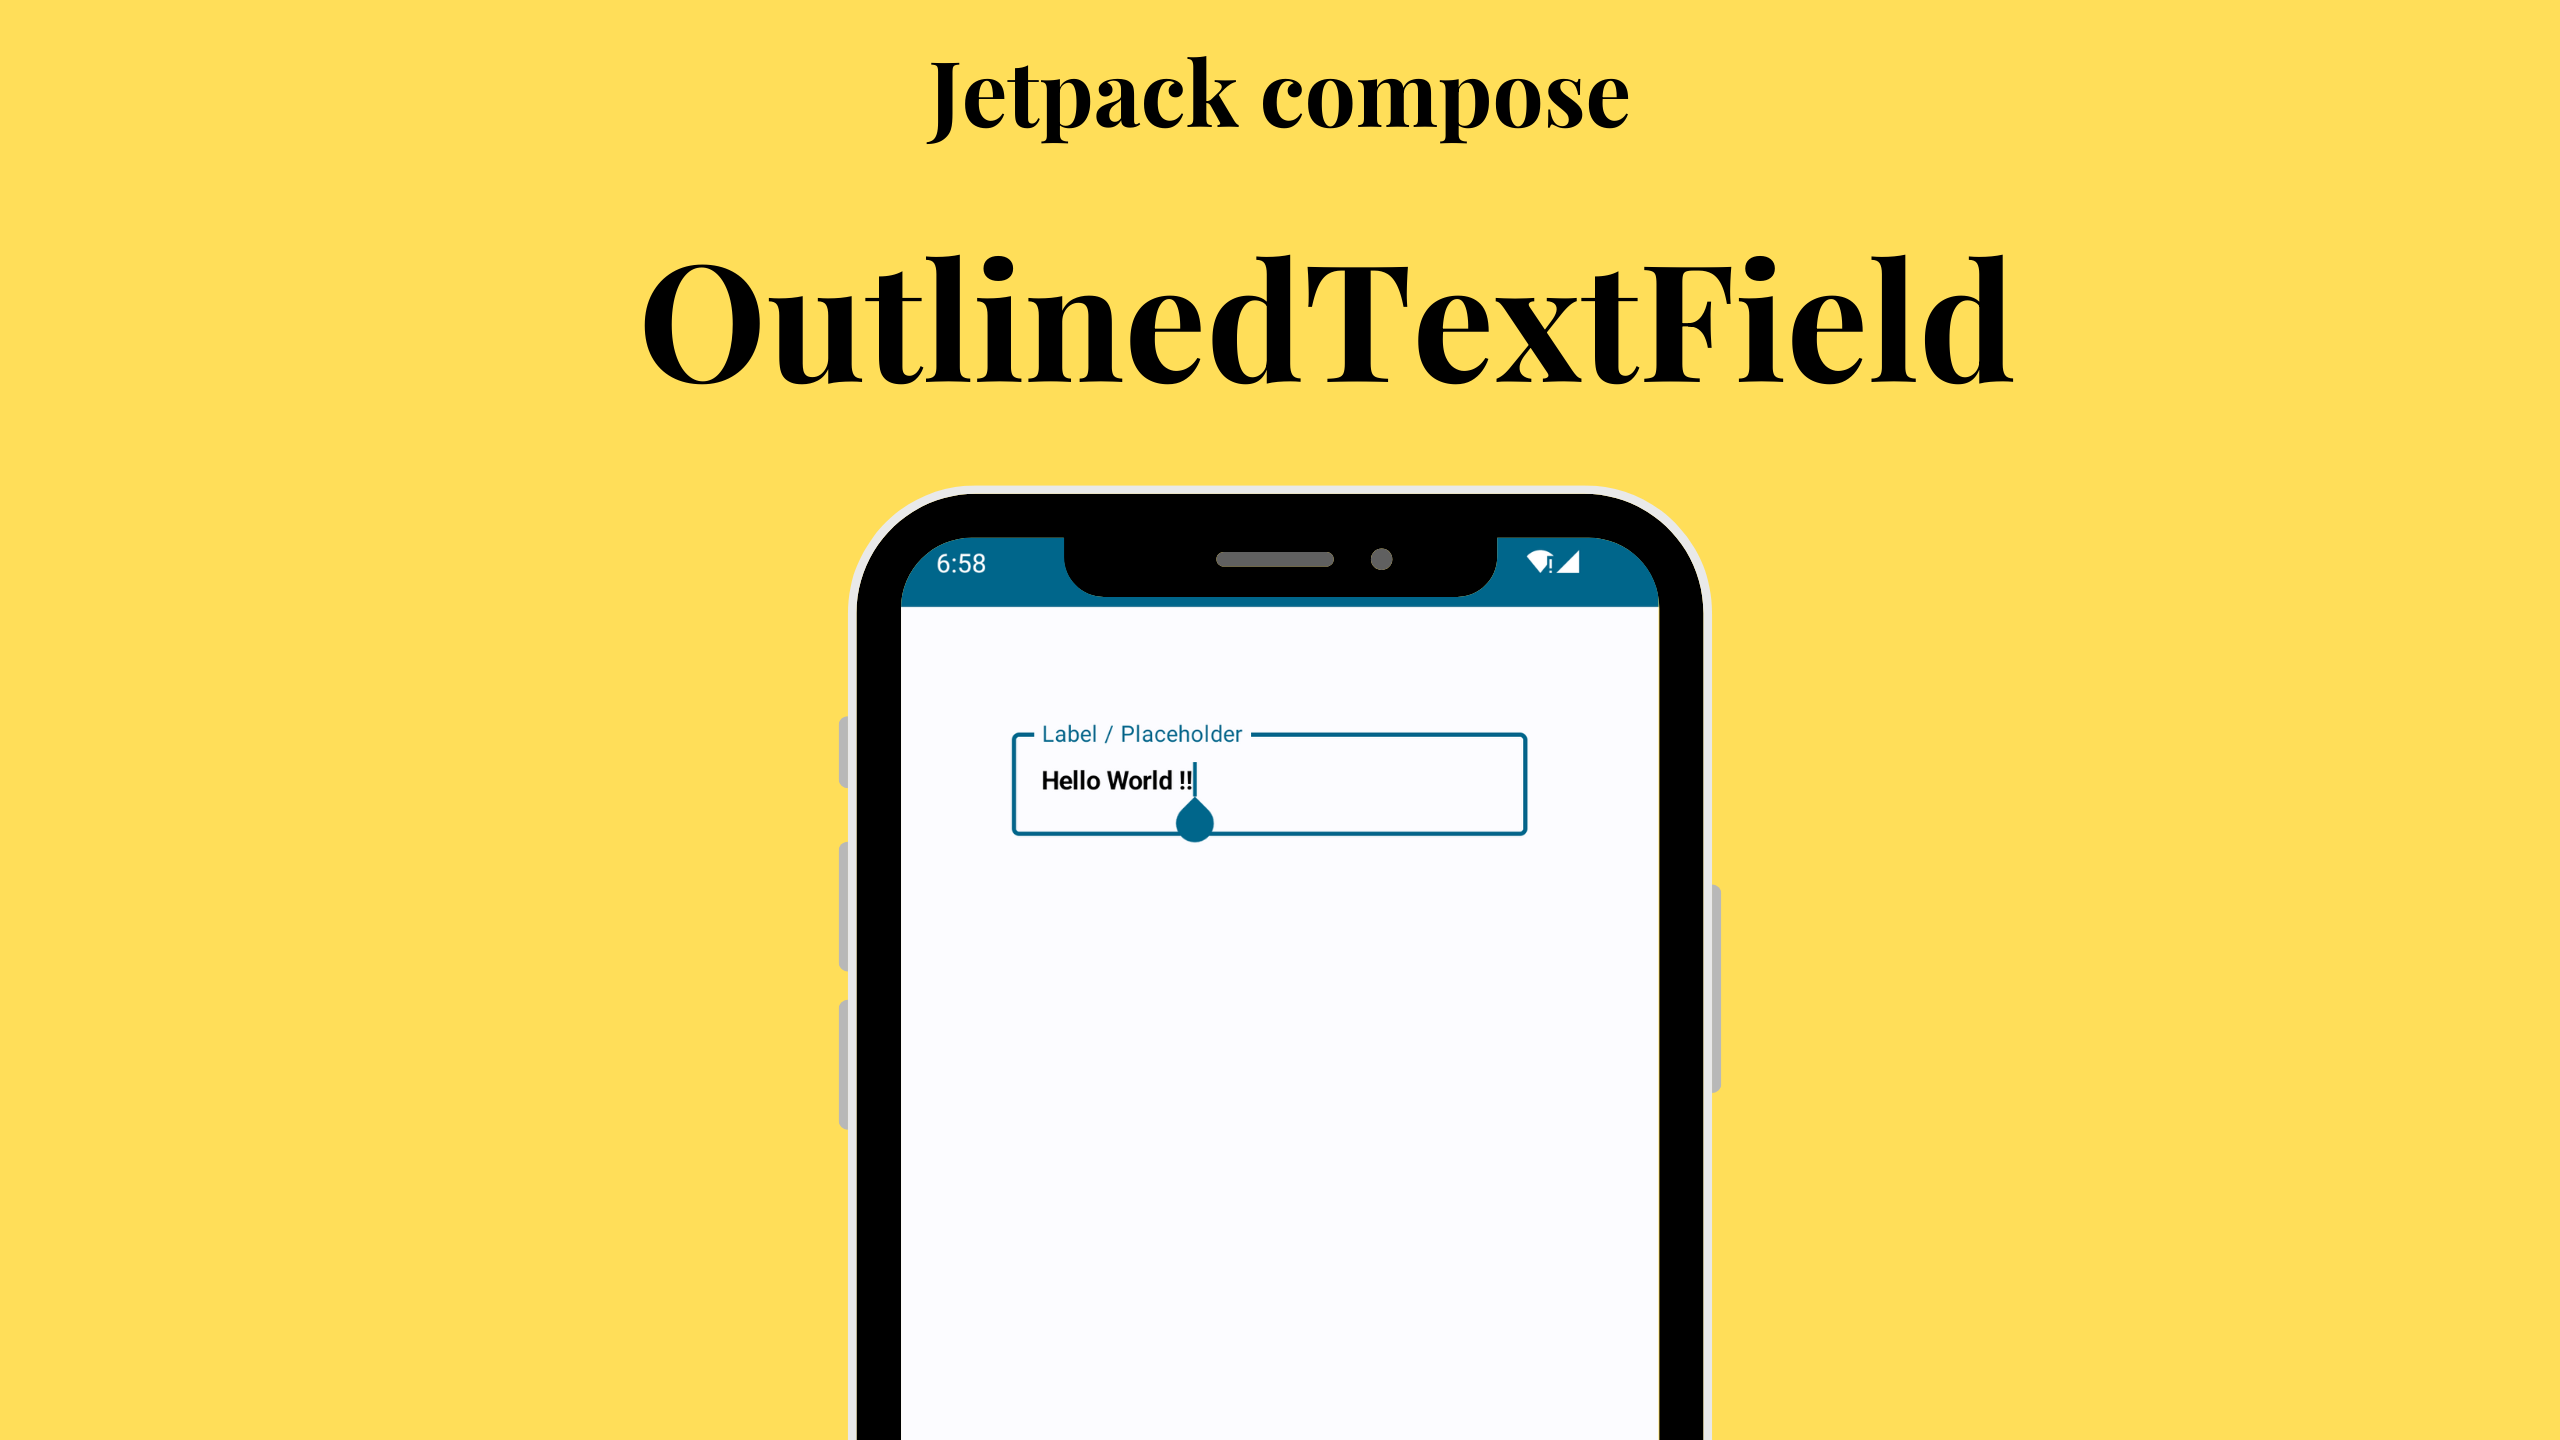 Jetpack compose : OutlinedTextField